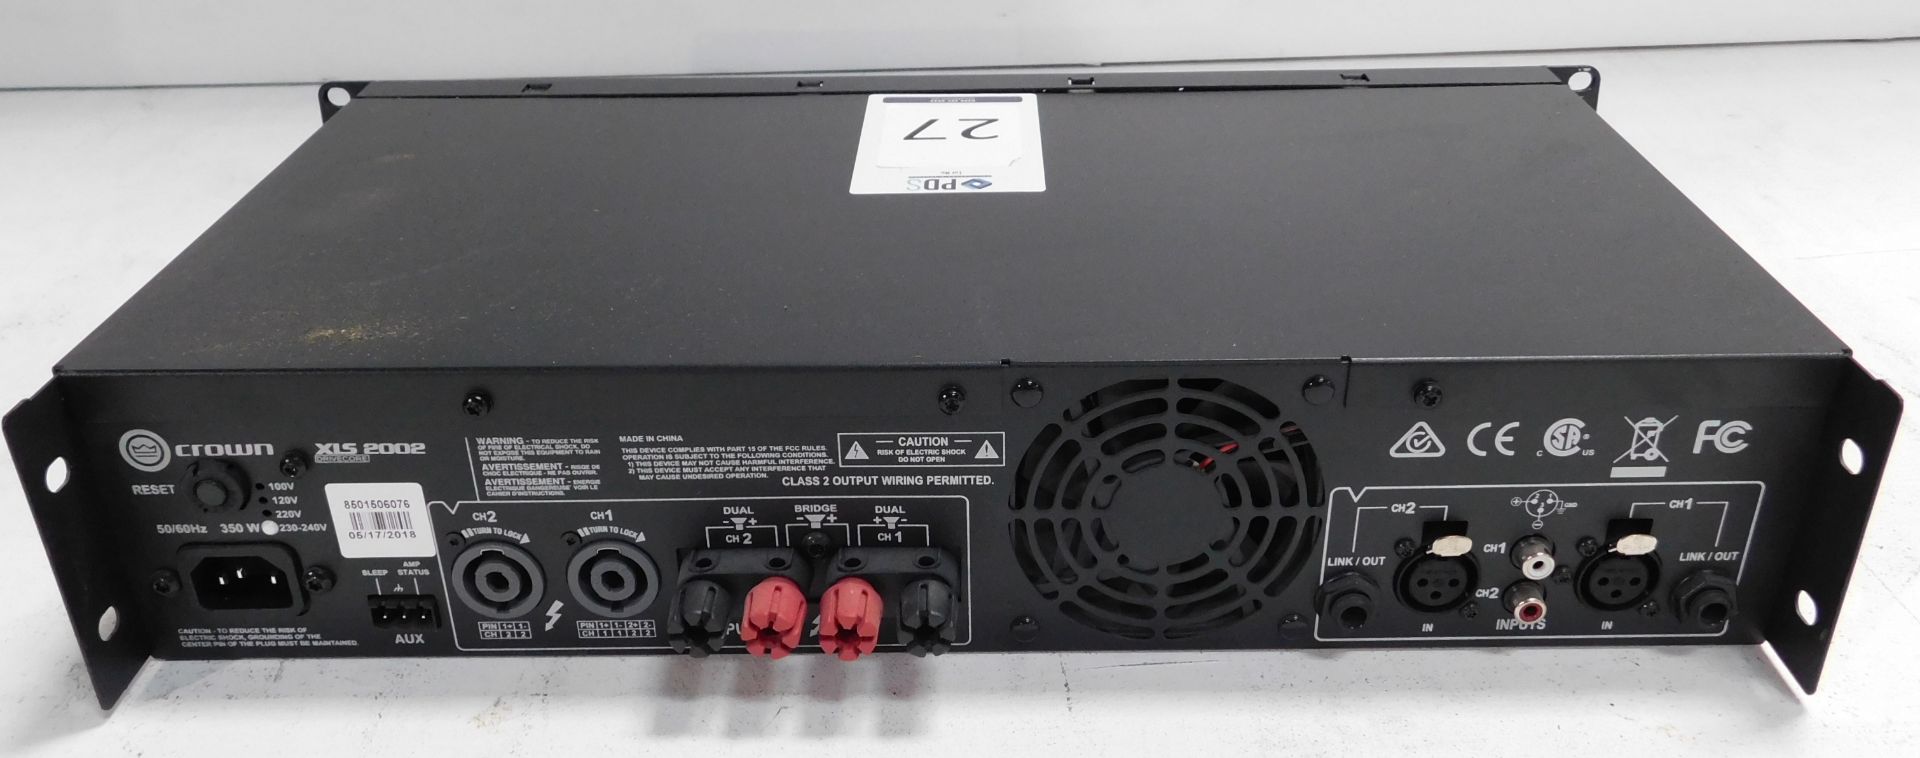 Crown XLS2002 Rack-Mount Power Amplifier (Location Brentwood. Please Refer to General Notes) - Image 2 of 2